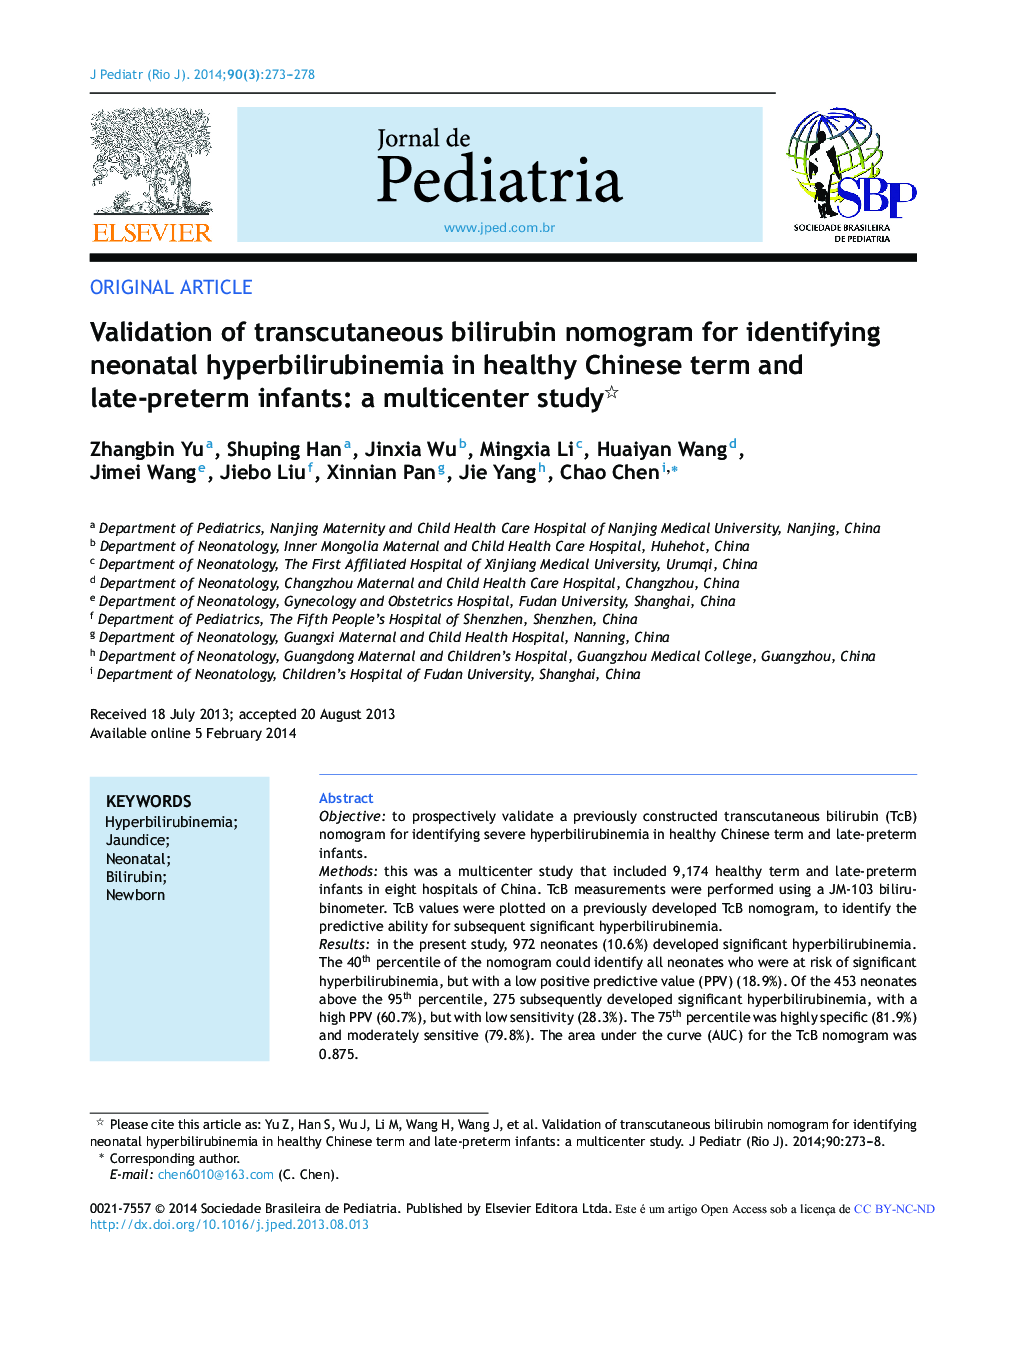 Validation of transcutaneous bilirubin nomogram for identifying neonatal hyperbilirubinemia in healthy Chinese term and late‐preterm infants: a multicenter study 